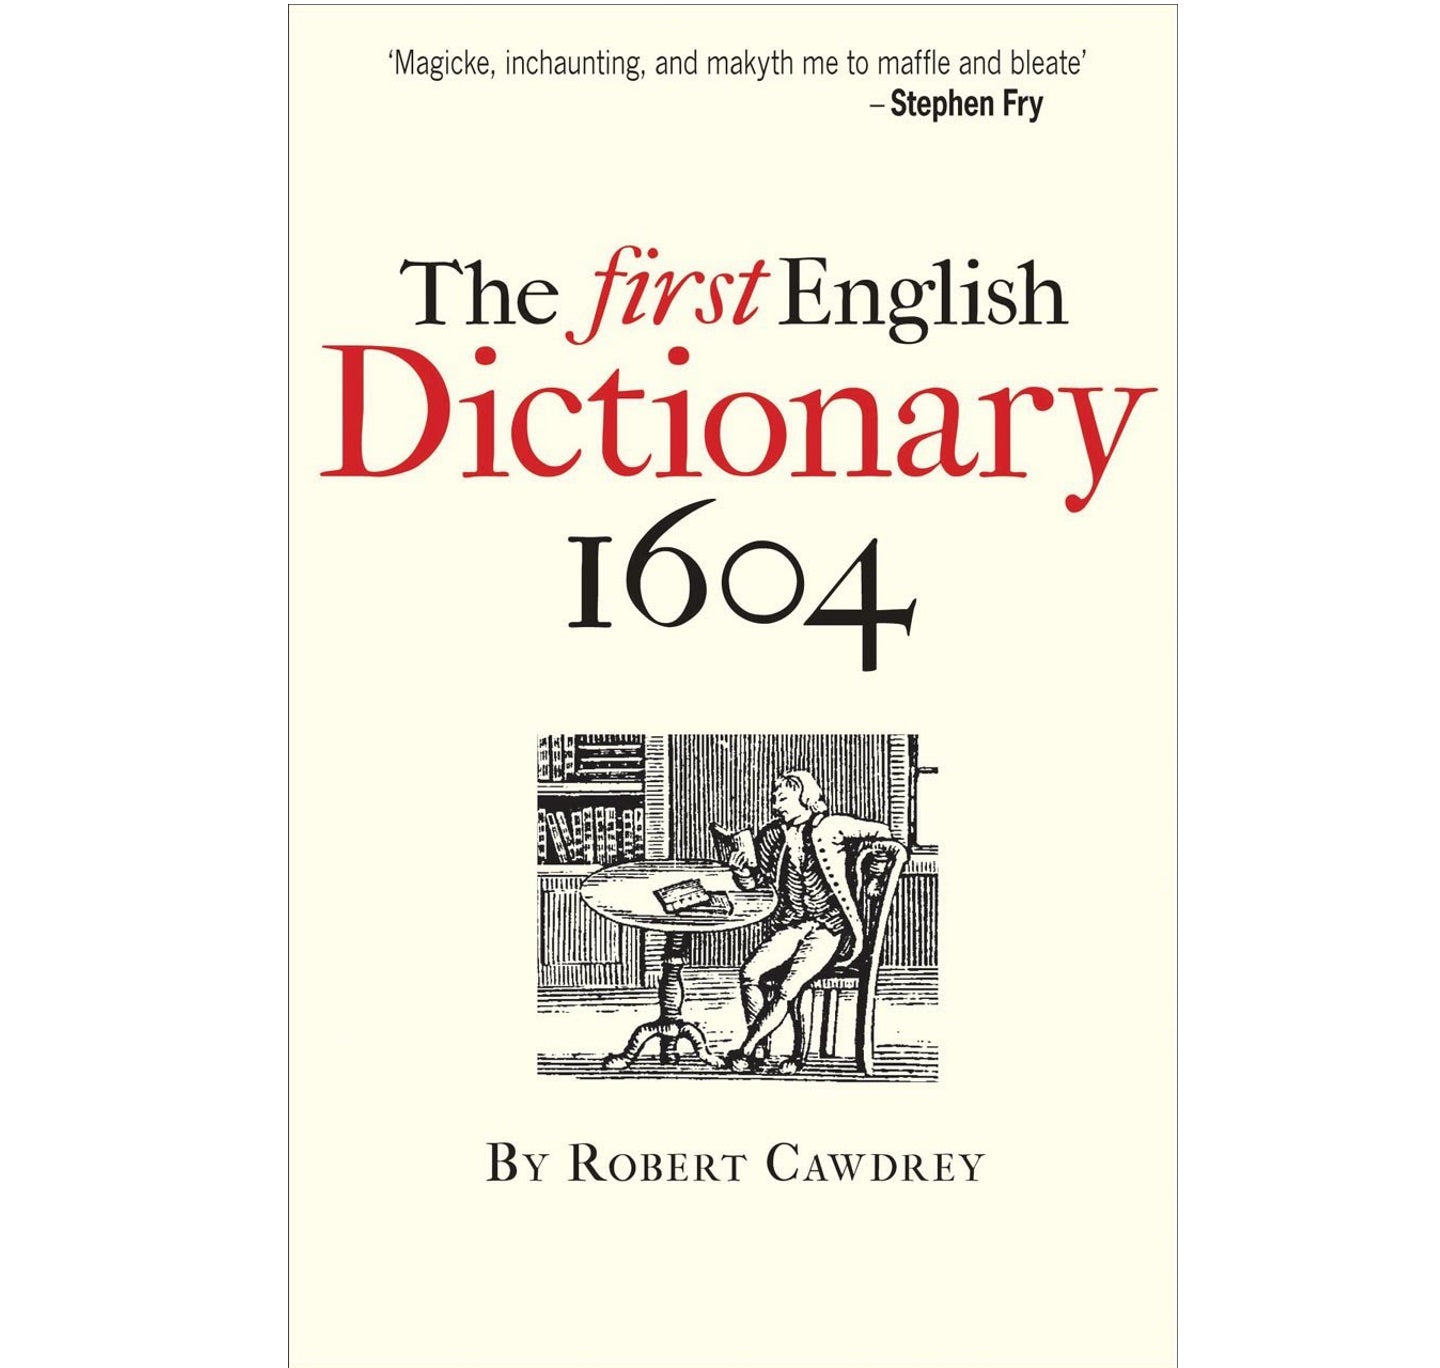 The First English Dictionary 1604 PB